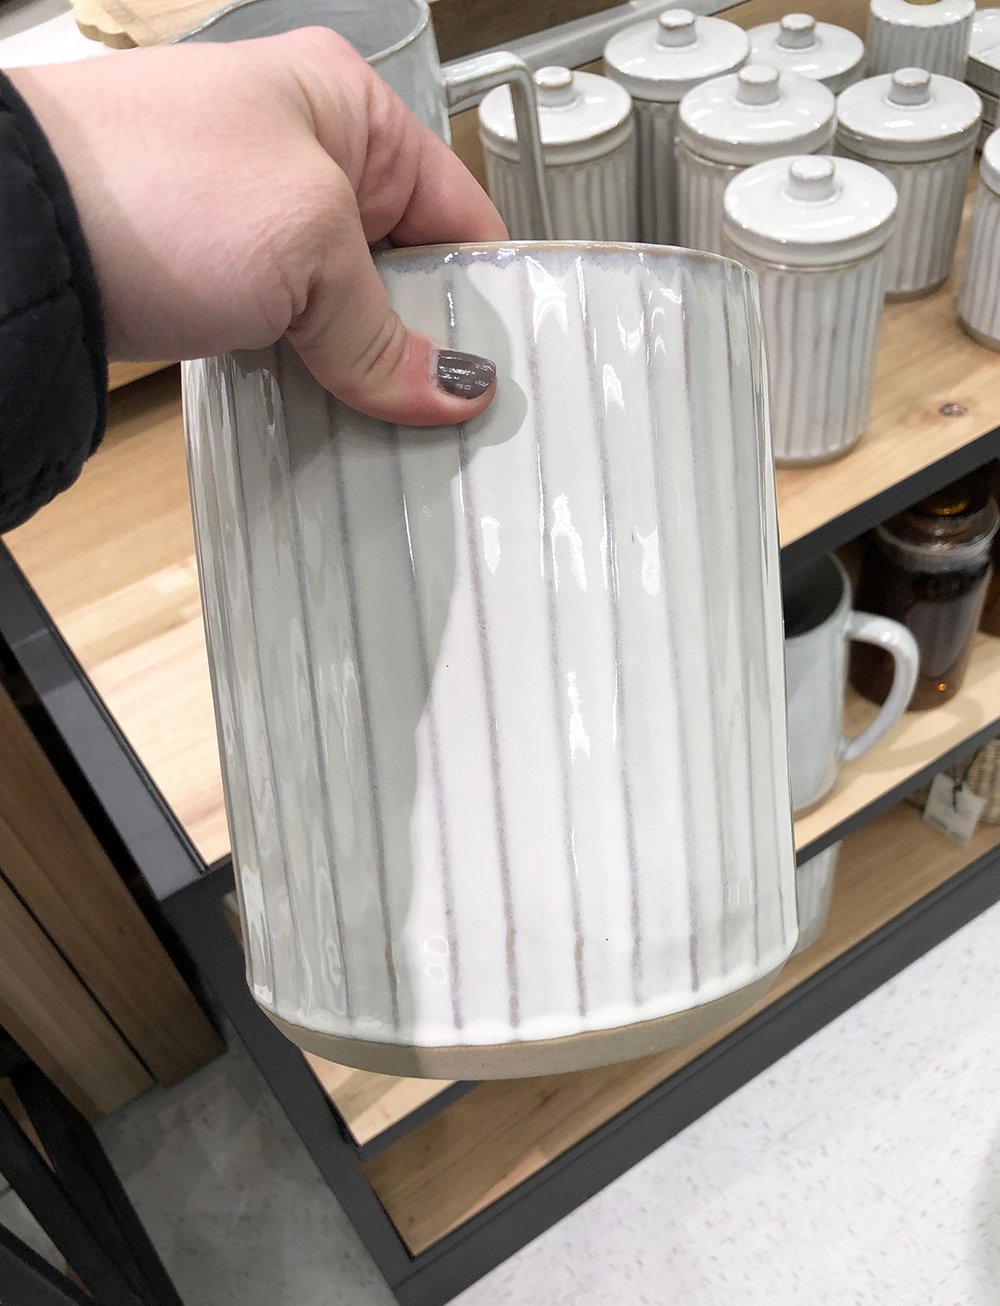 10 Home Decor Items That Impressed Me at Target - roomfortuesday.com